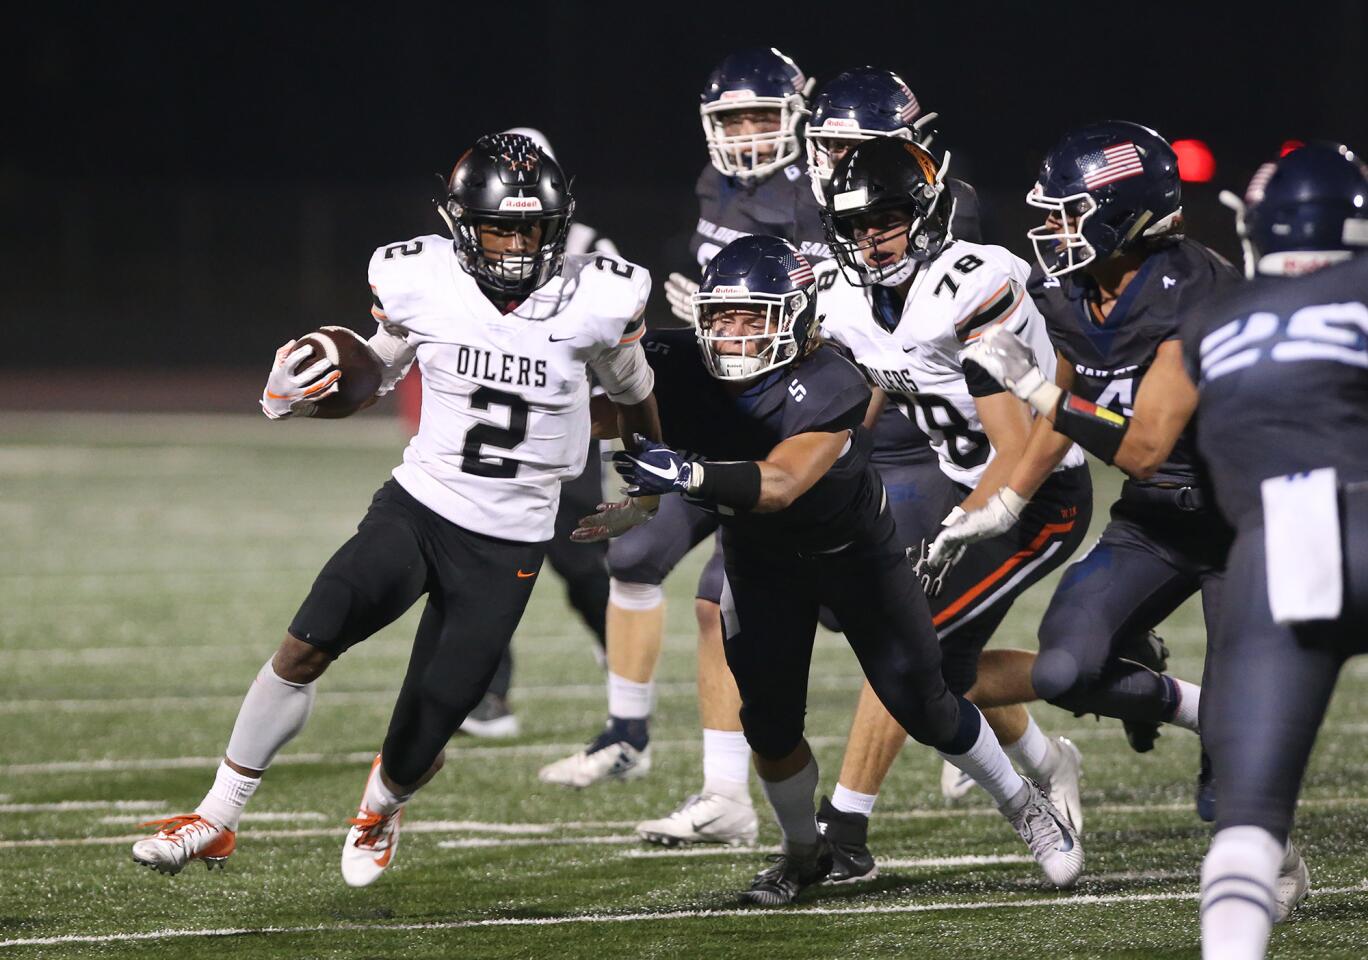 Huntington Beach High's Arick McLawer runs around end as Newport Harbor High defenders give chase during Sunset League football on Friday at Newport Harbor.